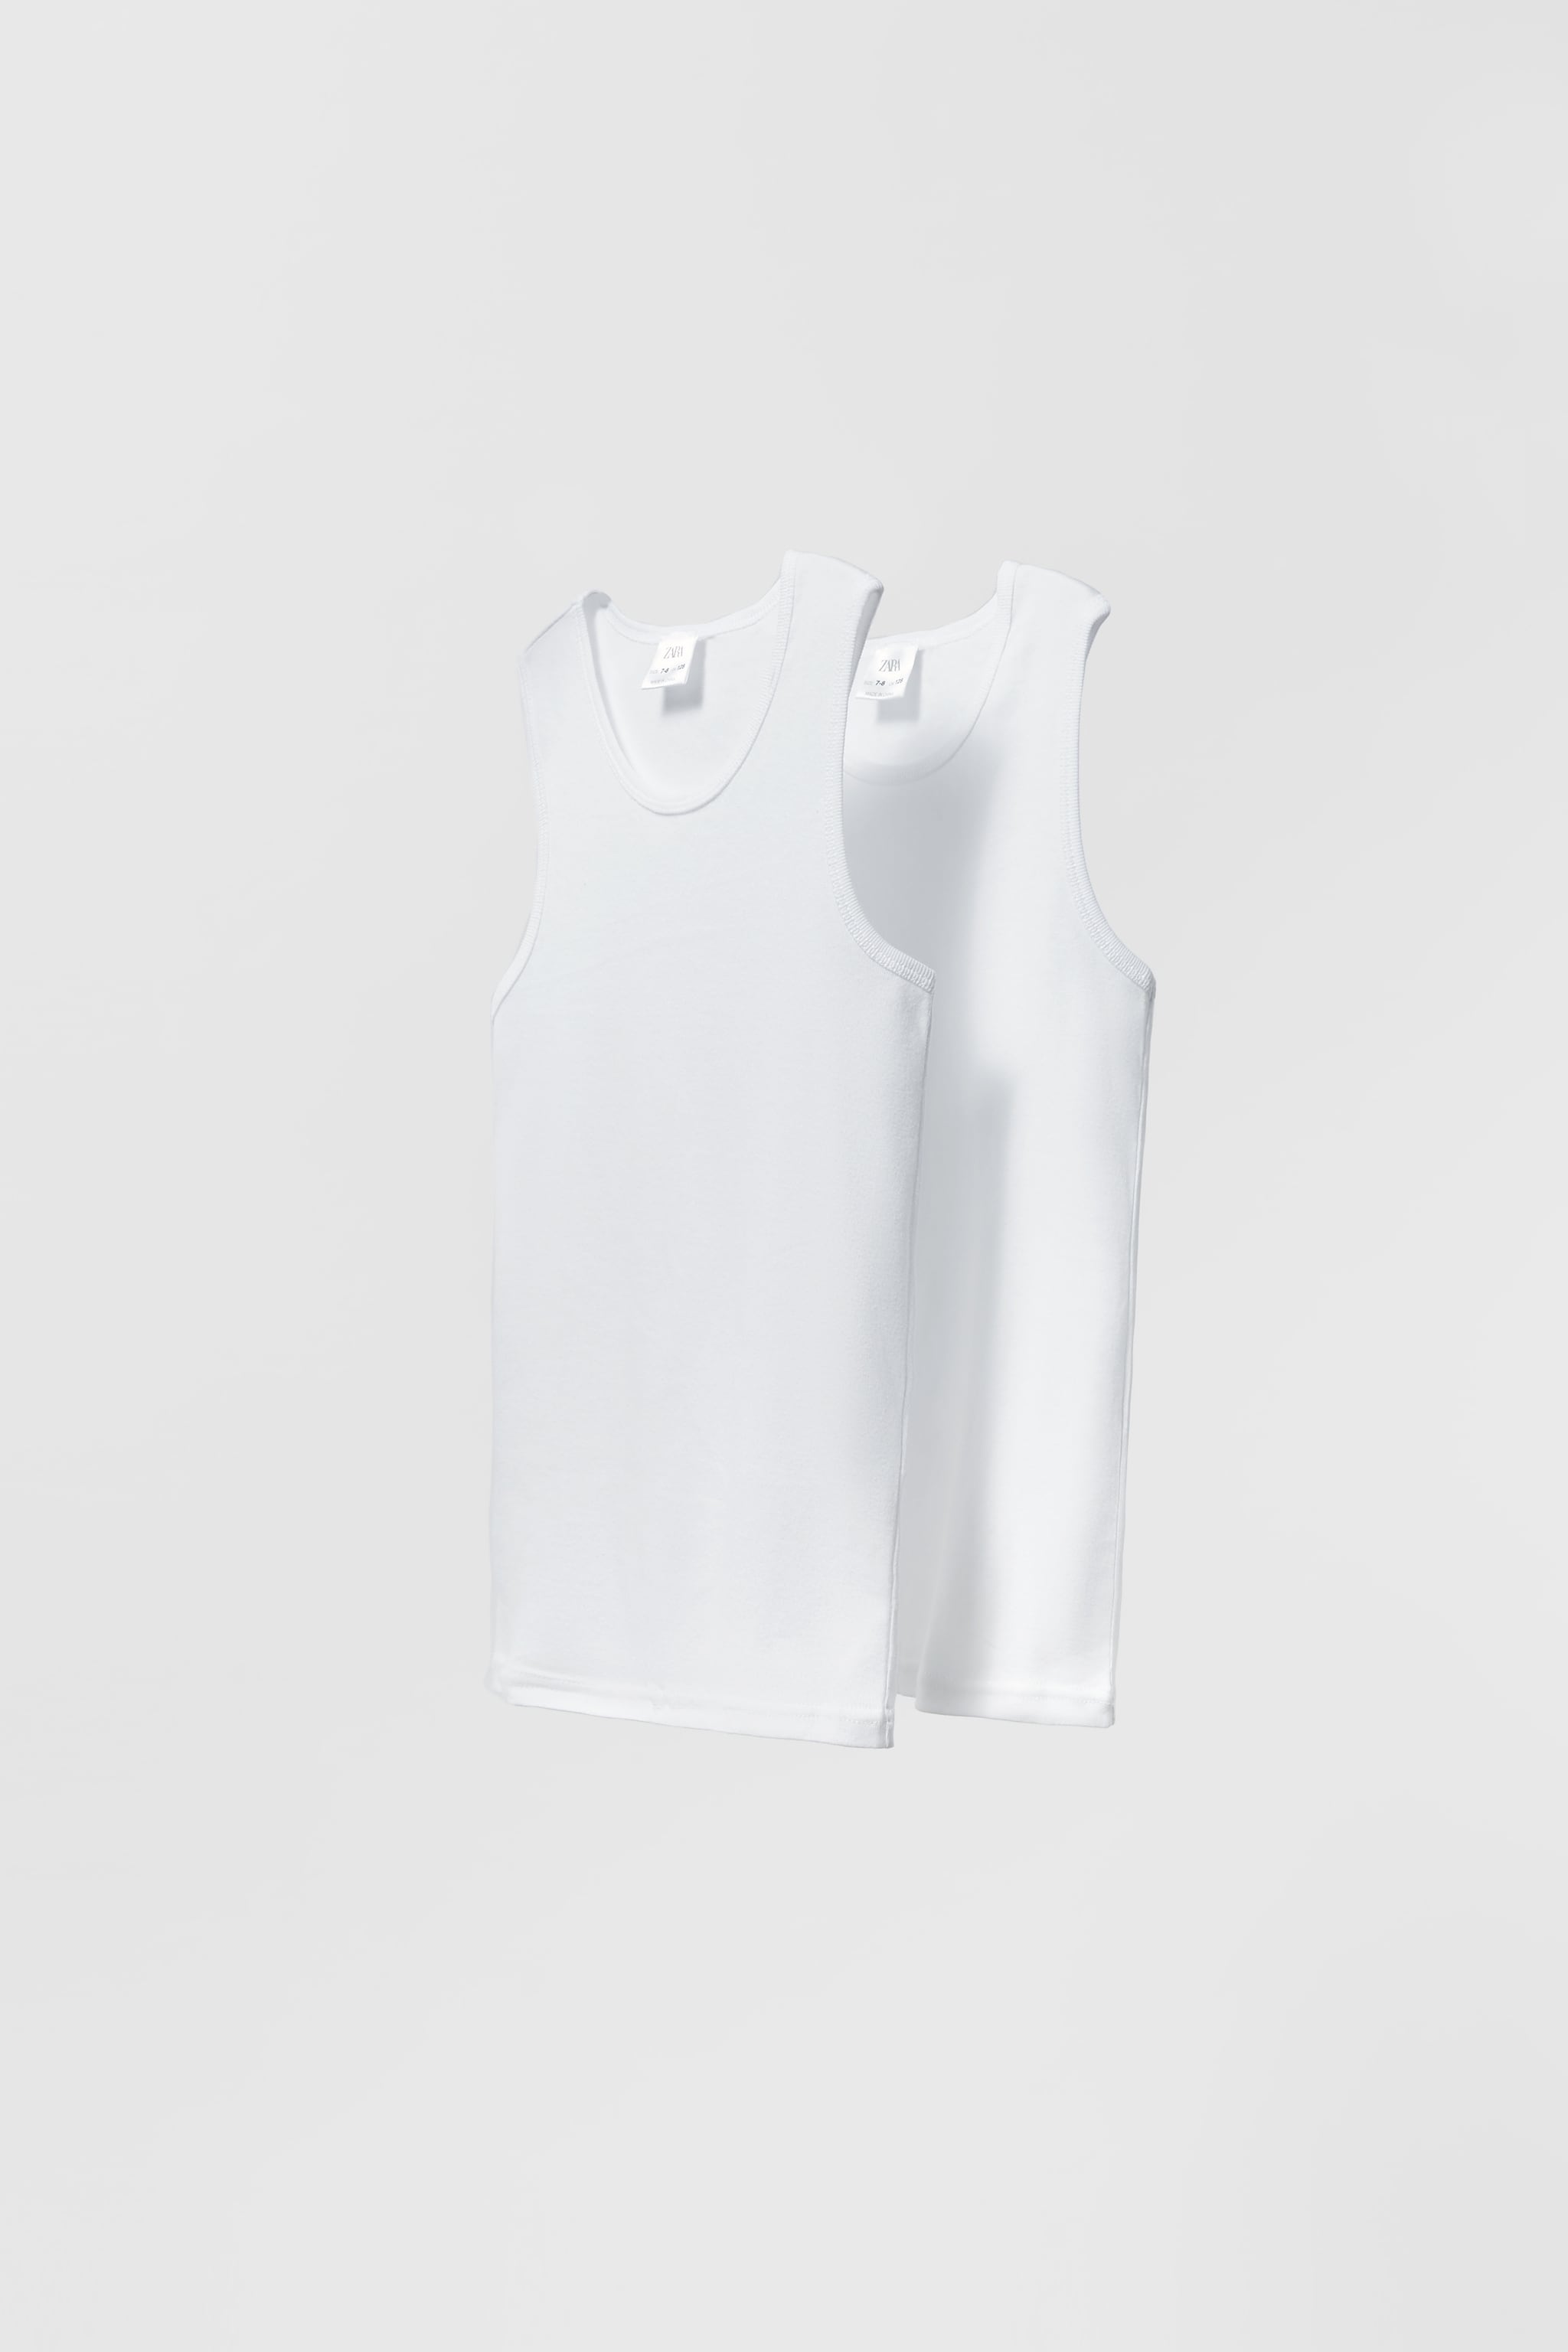 6-14 YEARS/ TWO-PACK OF BASIC TANK TOPS